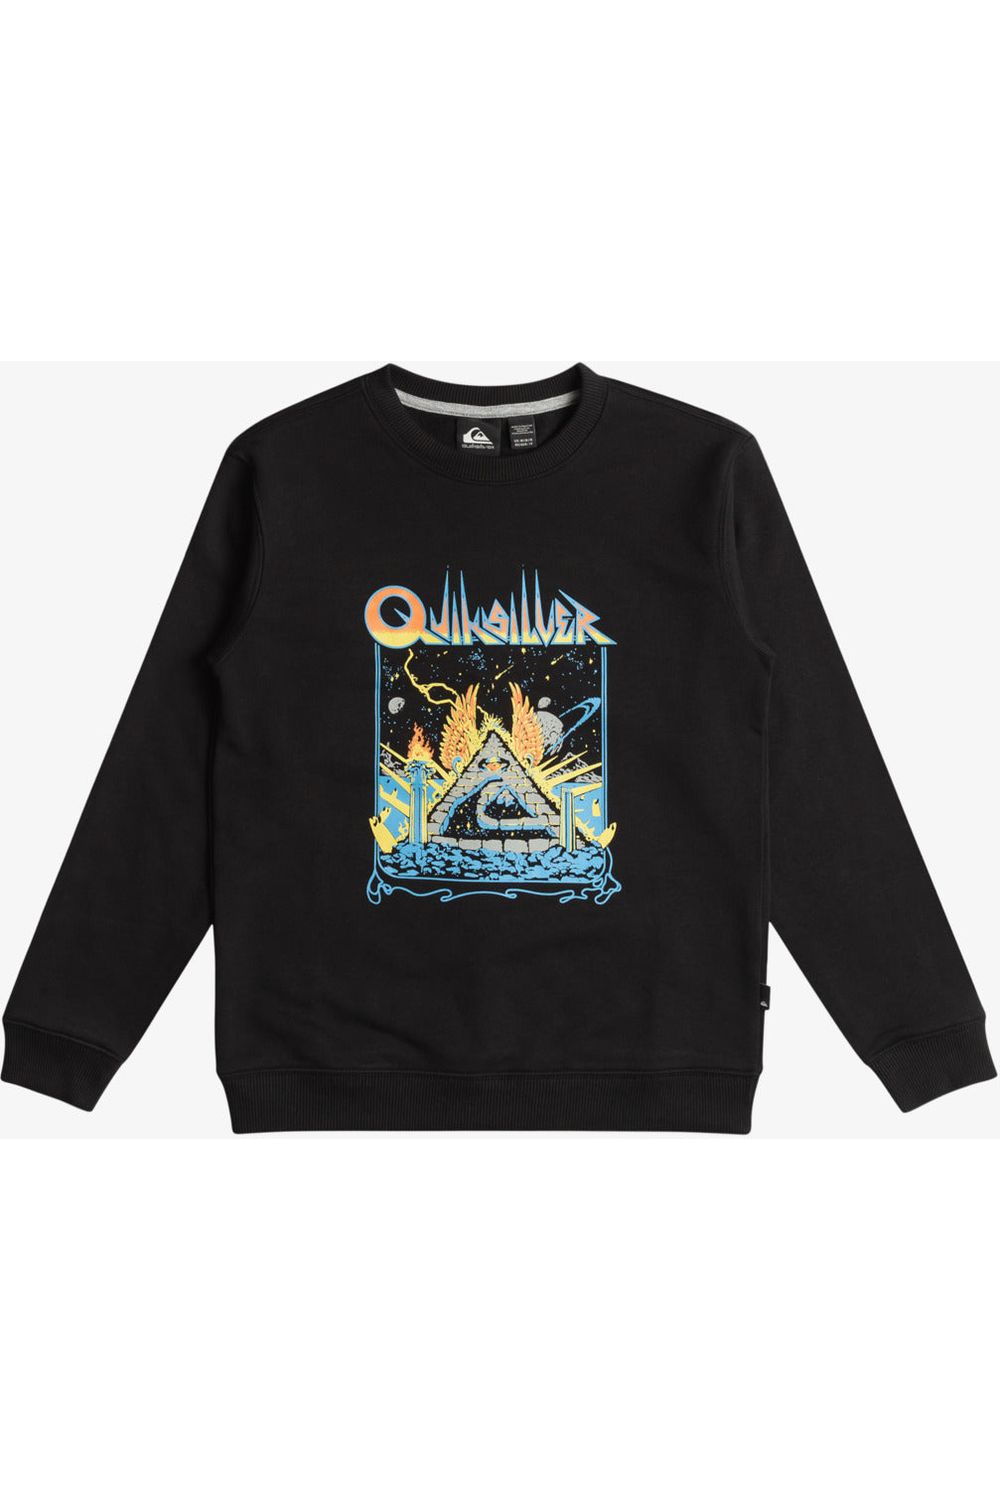 Quiksilver Graphic Crew Youth Sweat Black